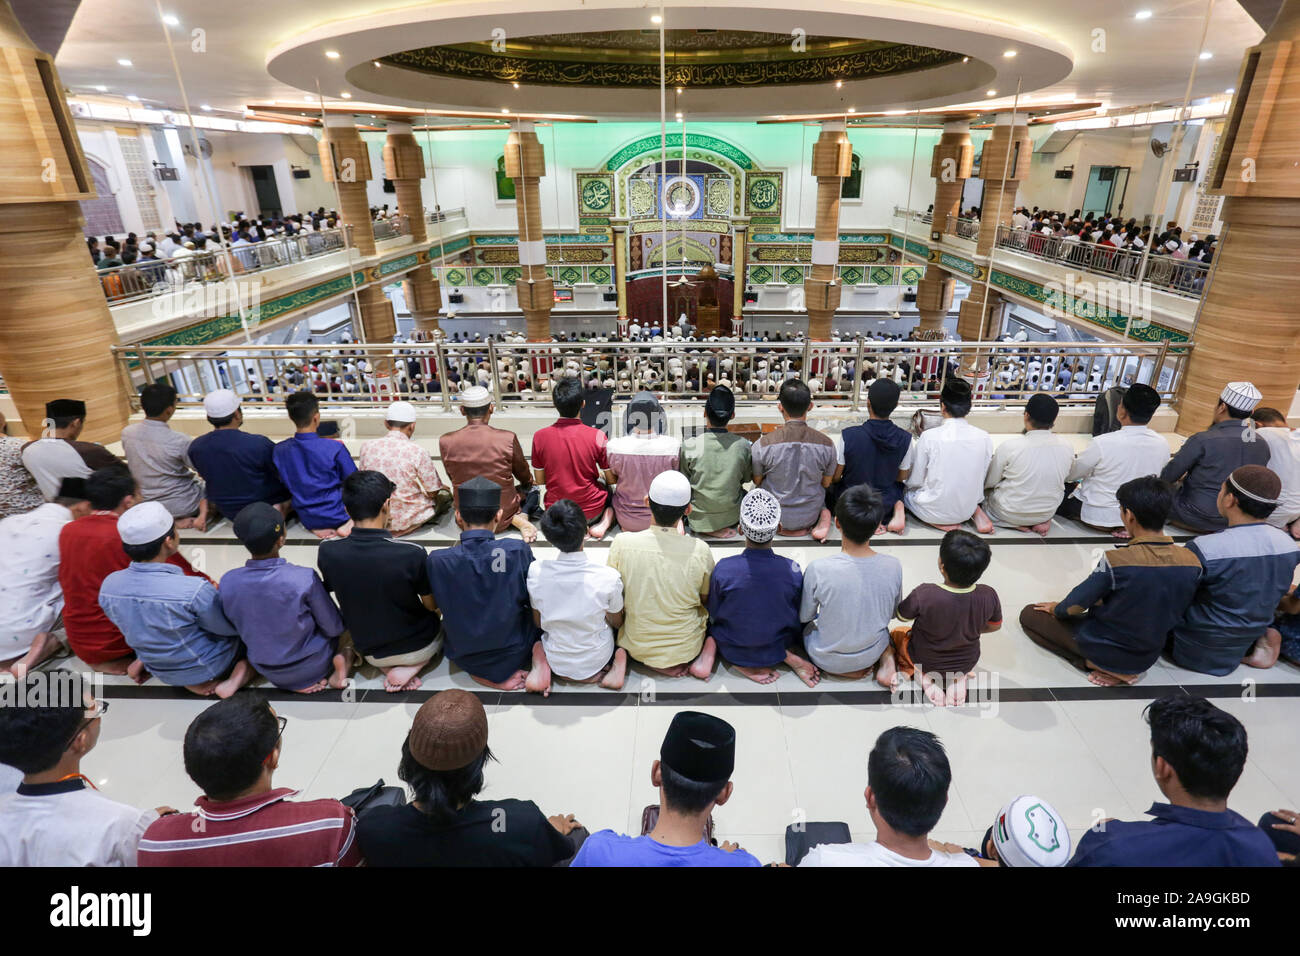 Celebration of congregational prayers at the Oman Mosque or Al Makmur Grand Mosque, Banda Aceh, Indonesia Stock Photo